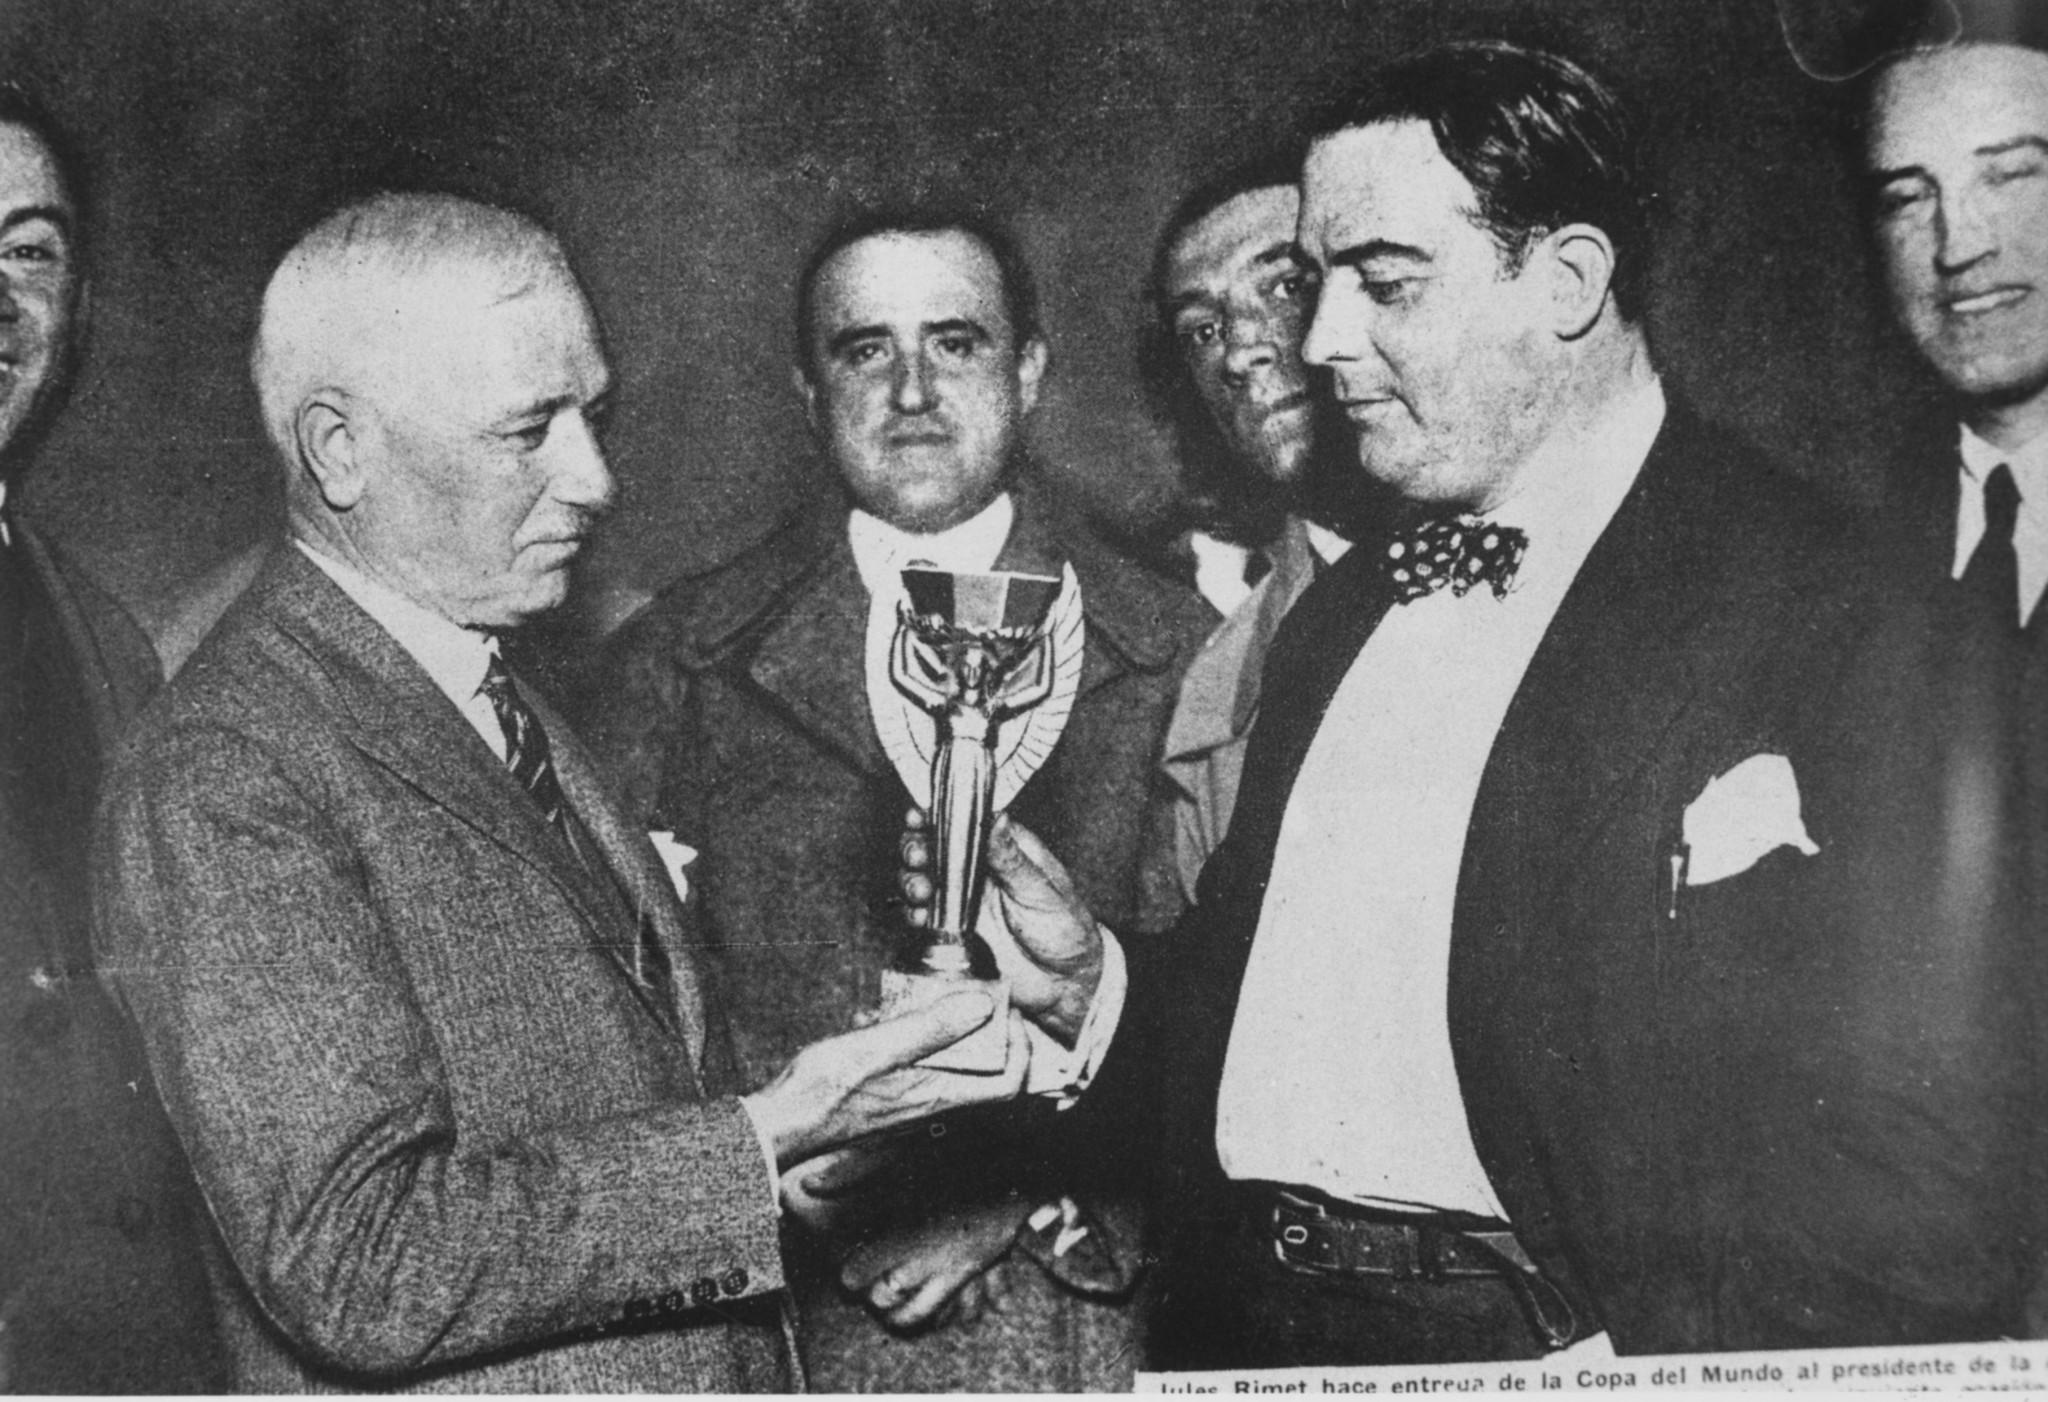 In 1930 Jules Rimet presented the first World Cup trophy to representatives of the first winners Uruguay ©Getty Images